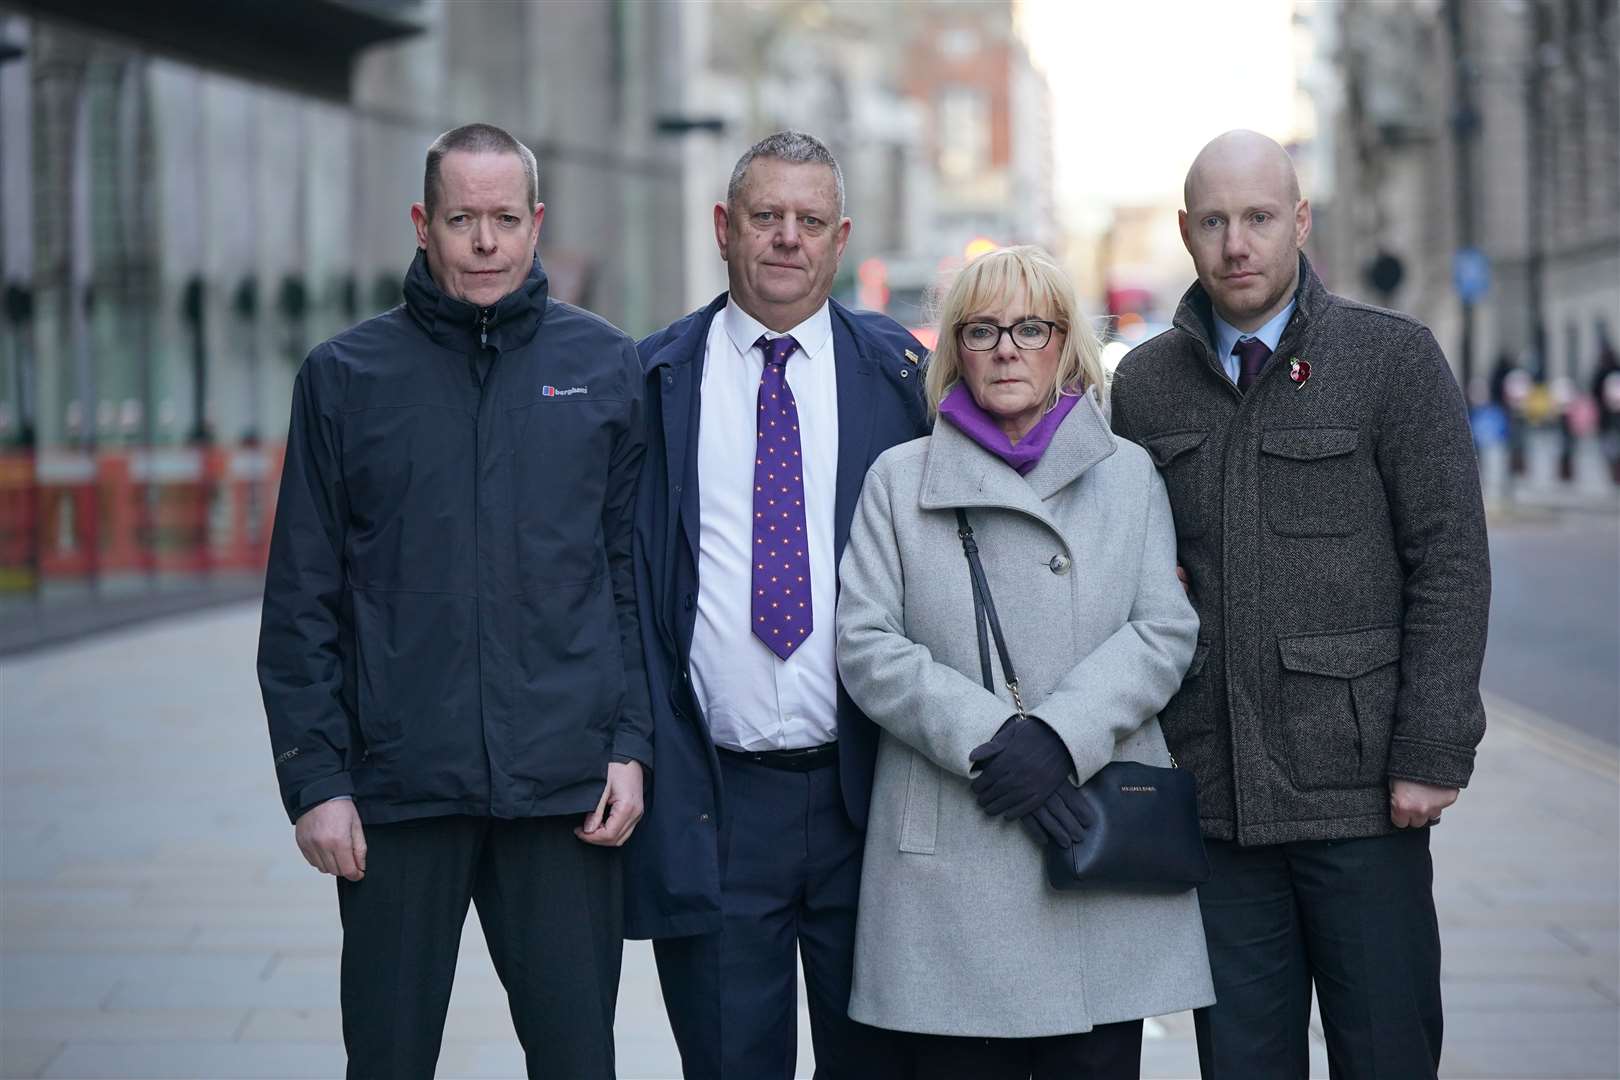 Andrew Wails, Gary Furlong, Jan Furlong and Gary Furlong Jnr outside the Old Bailey for the inquest for victims of the Reading terror attack (Yui Mok/PA)